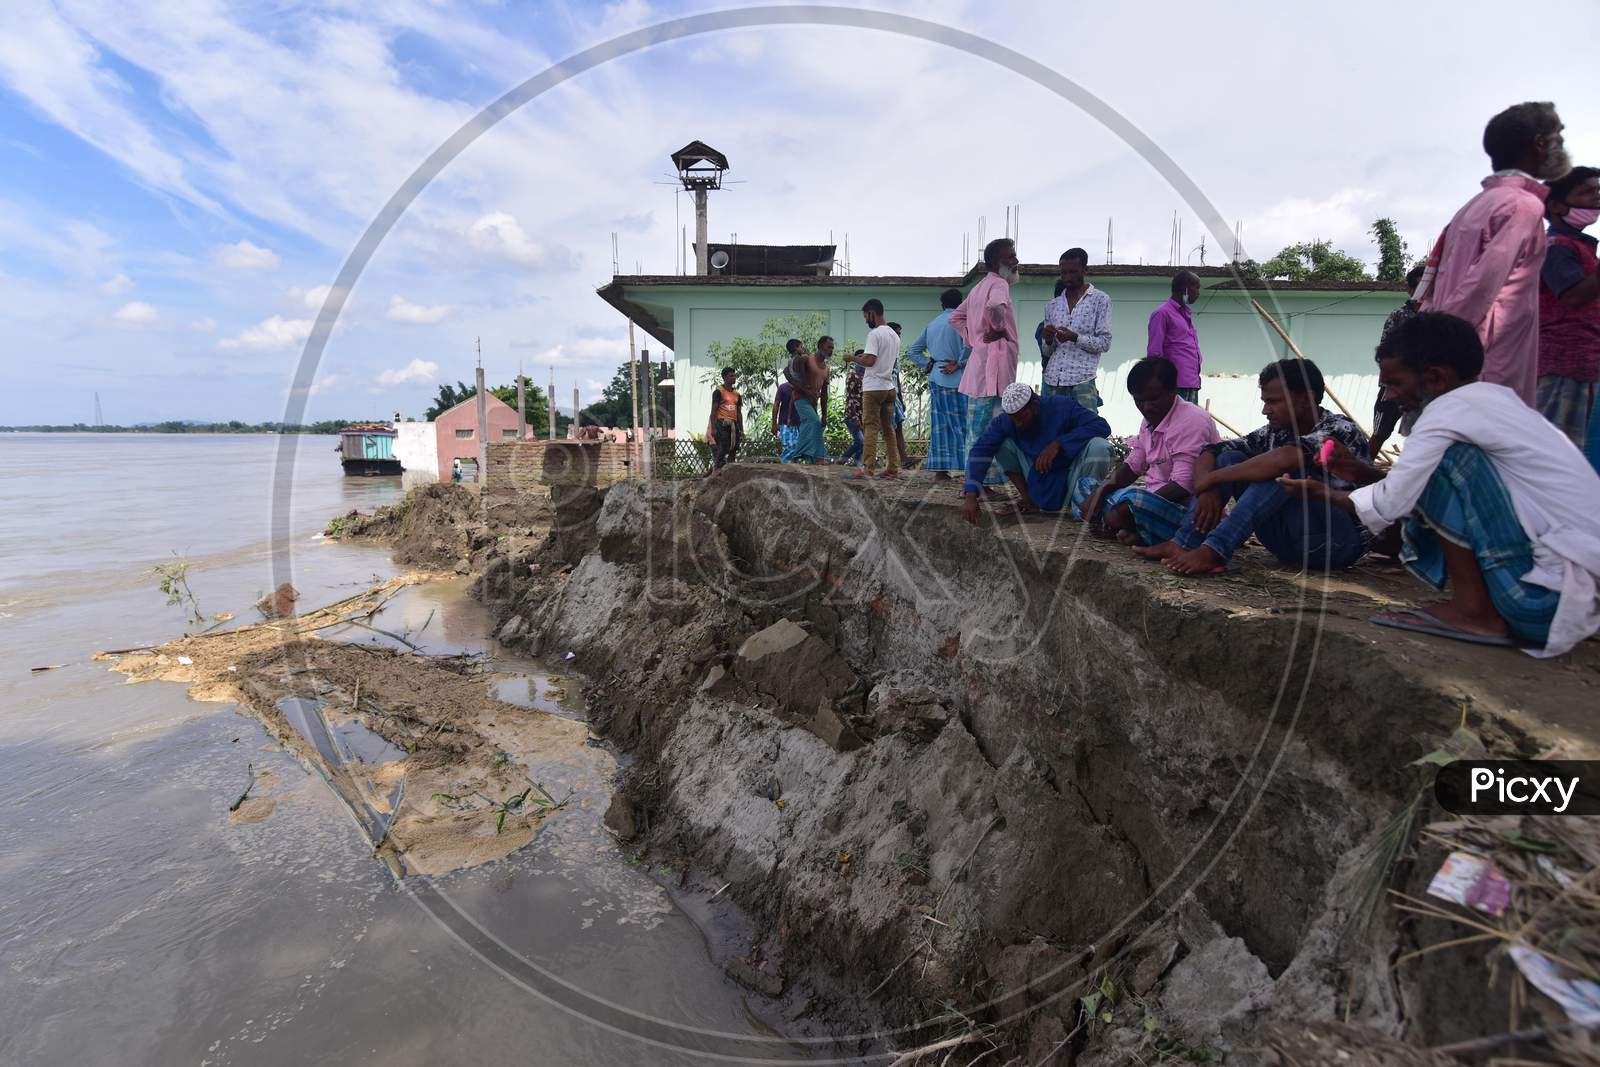 Villagers Stand Next To A School And Mosque That Collapsed On The Banks Of Brahmaputra River Owing To Soil Erosion, At Bhurbandha Village In Nagaon District Of Assam On July 25, 2020.